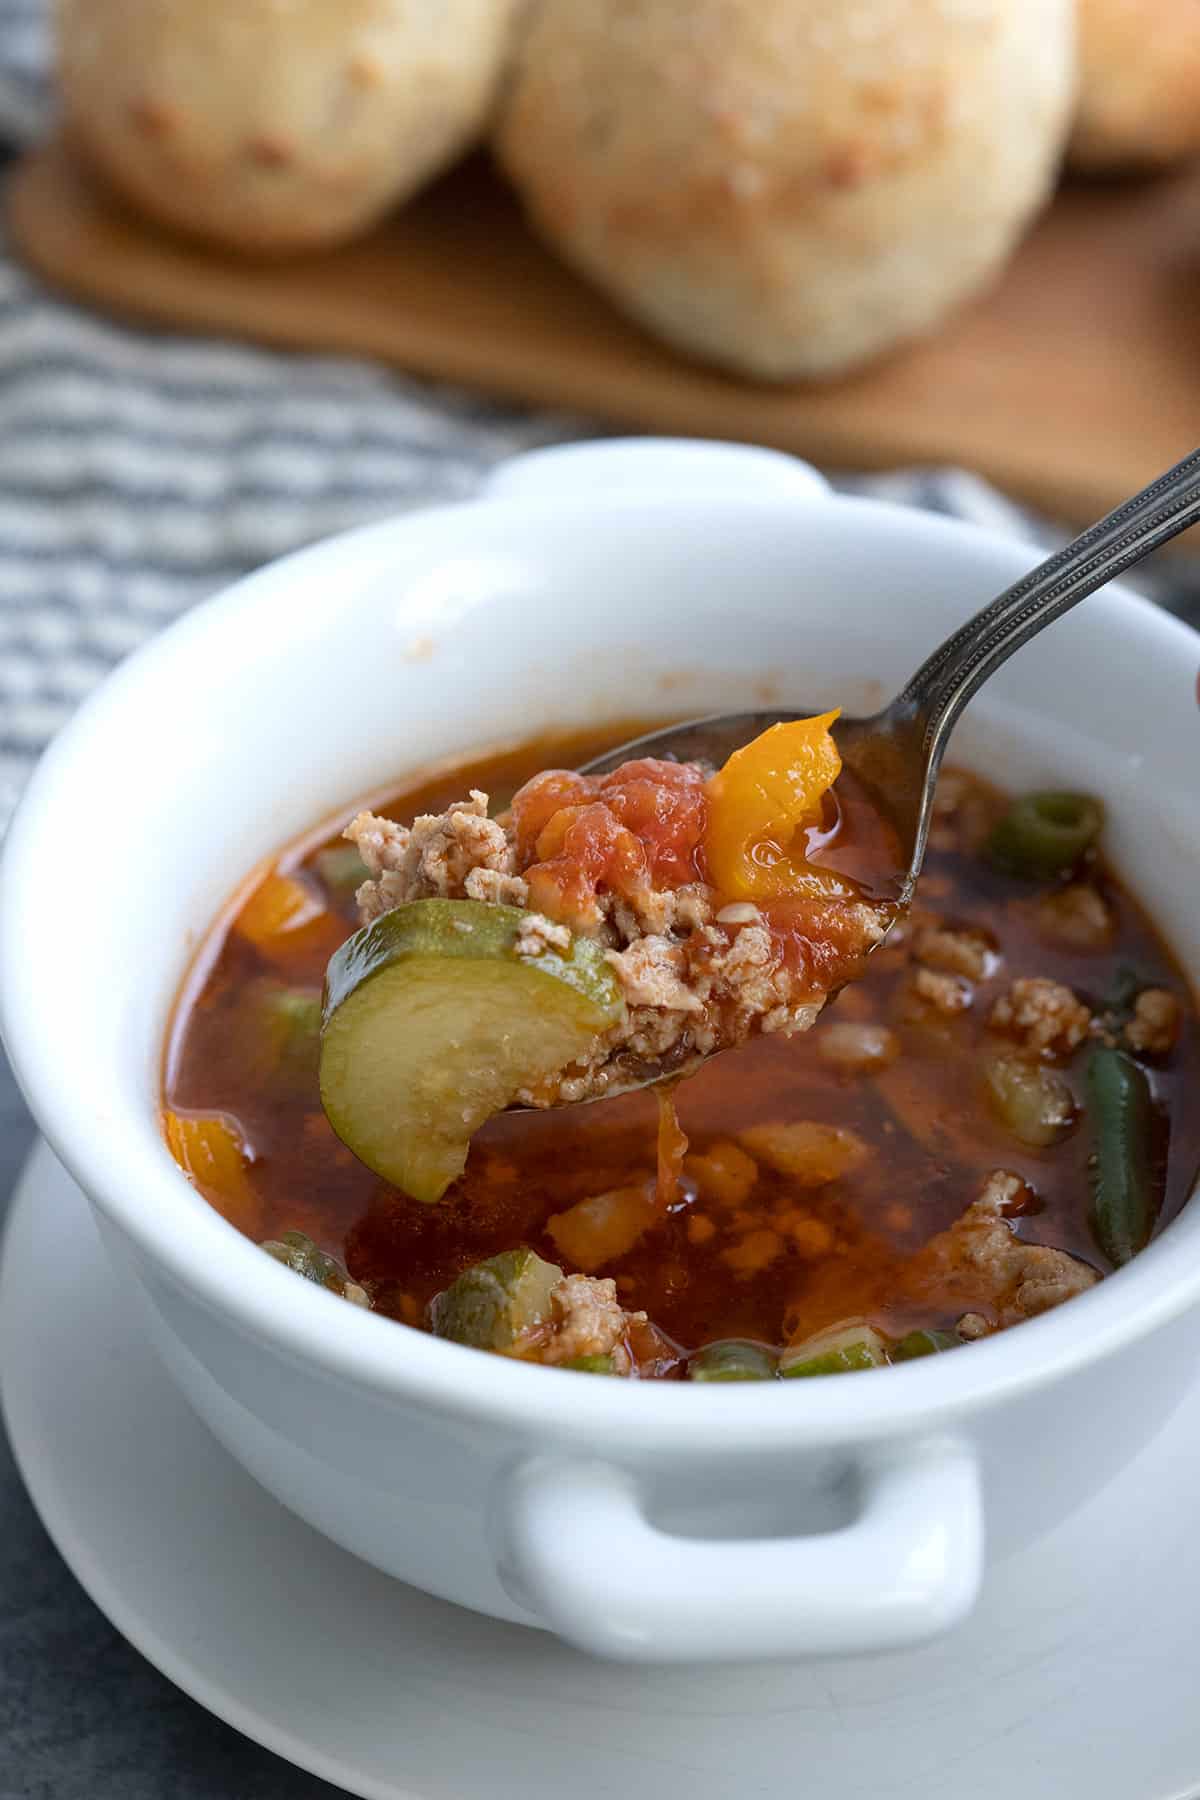 Italian Sausage Vegetable Soup - Keto - All Day I Dream About Food